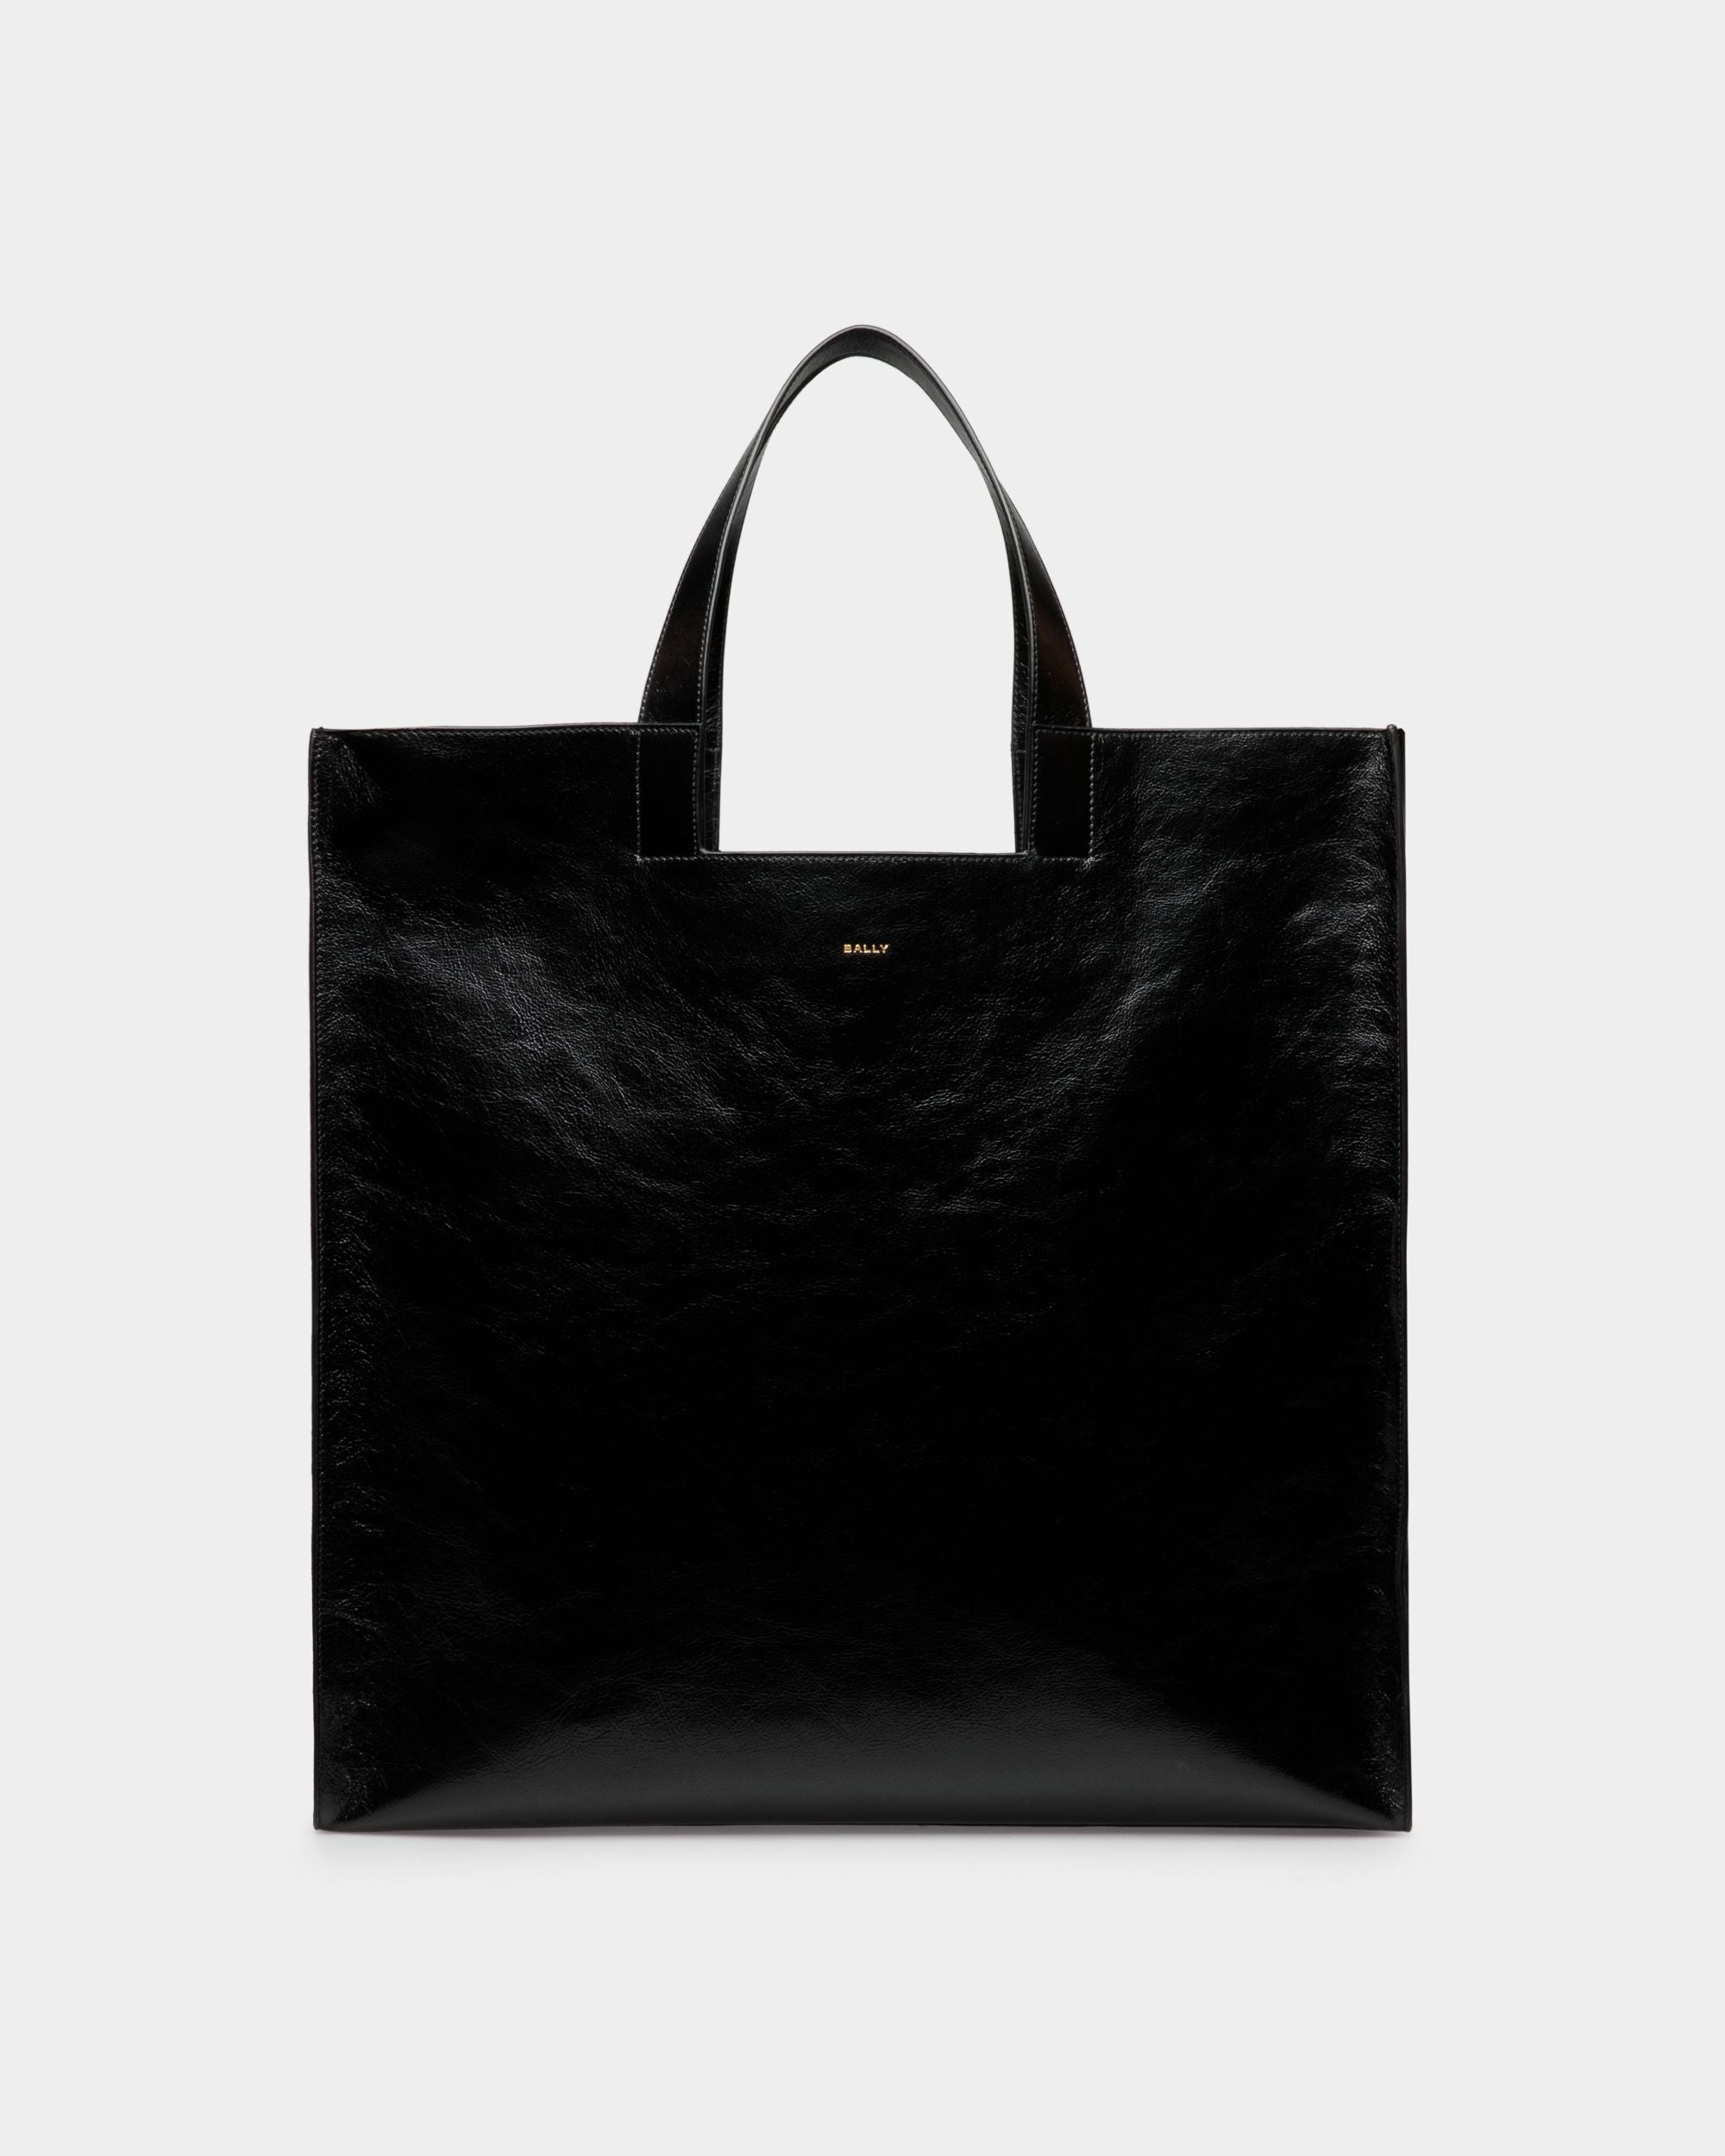 Men's Easy Bally Tote in Black Leather | Bally | Still Life Front